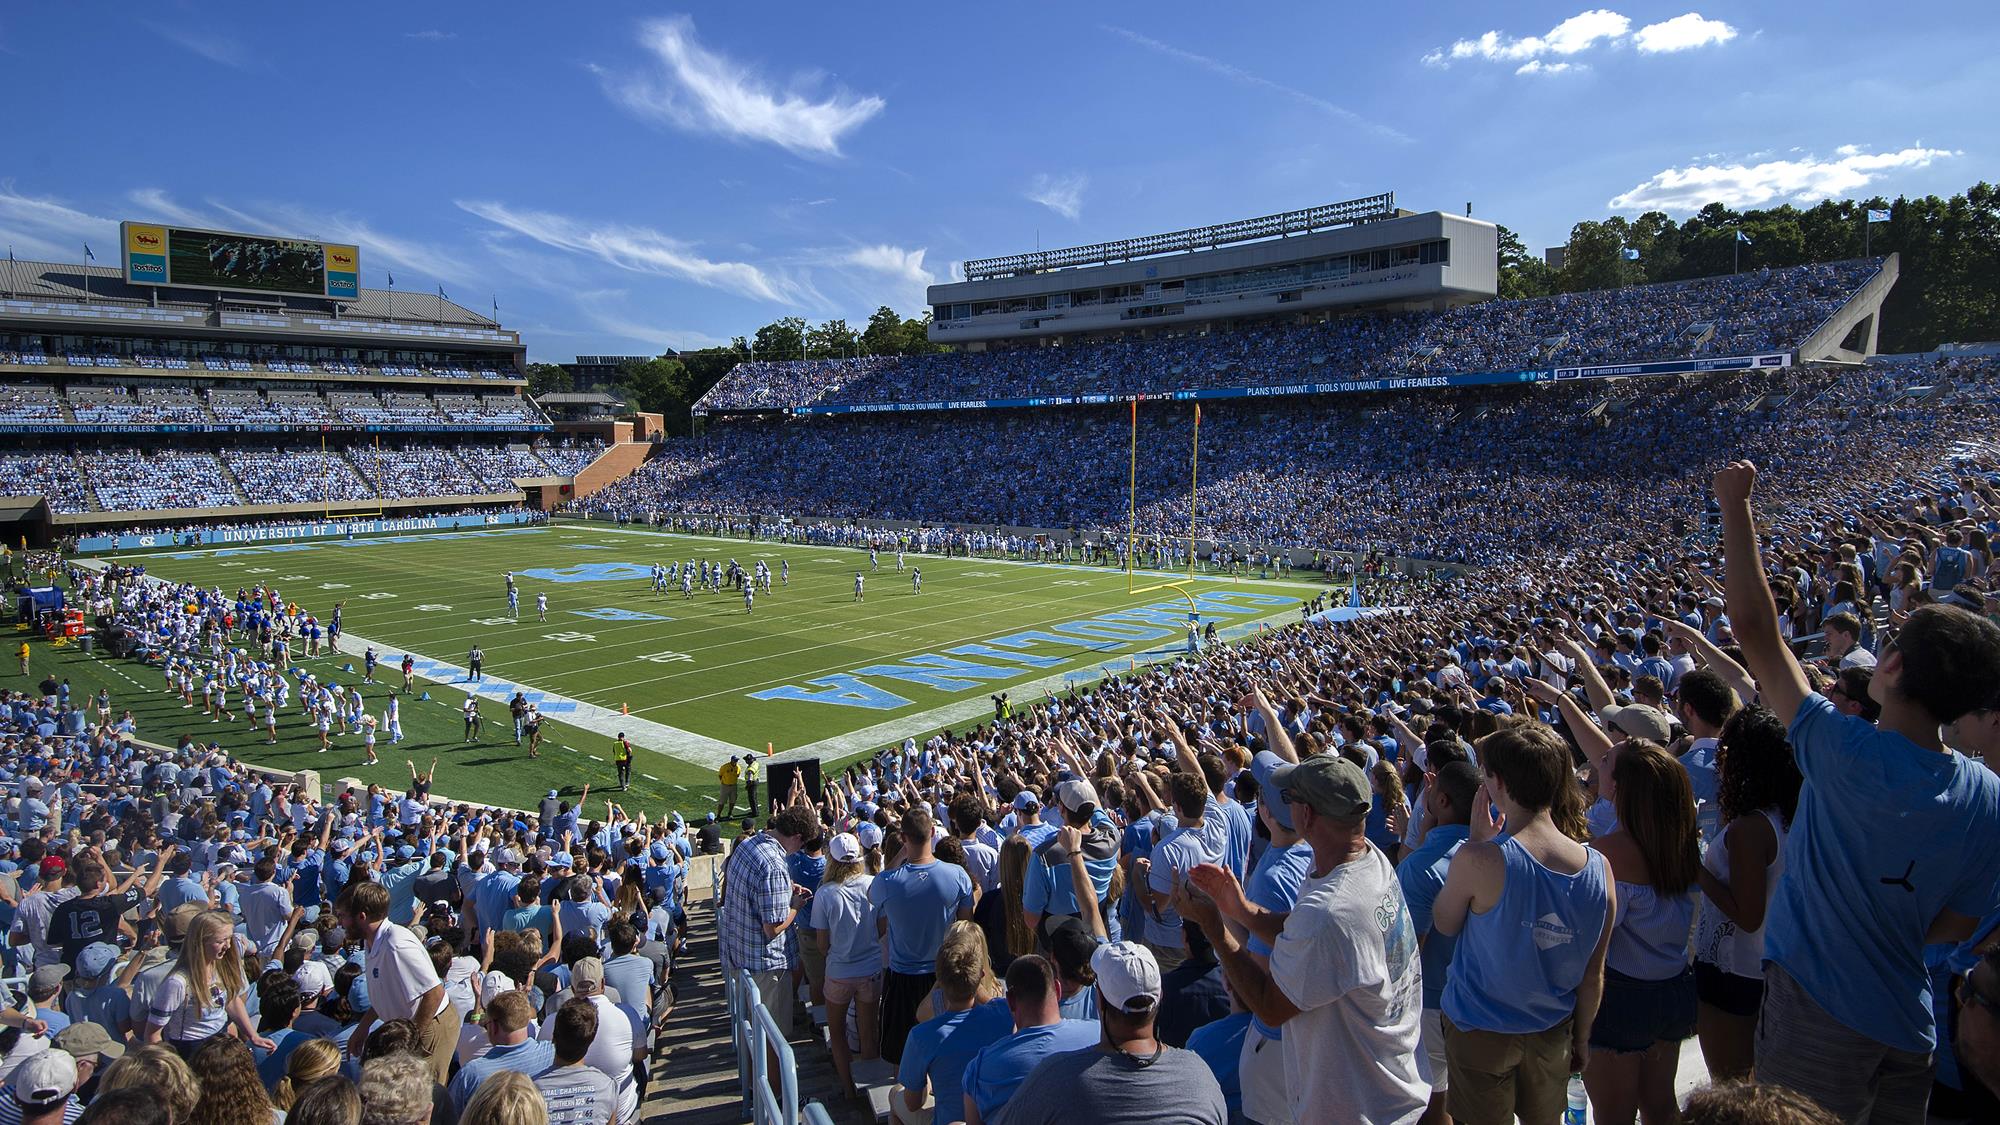 UNC Football vs. Florida A&M: How to Watch, Cord-Cutting Options and Kickoff Time